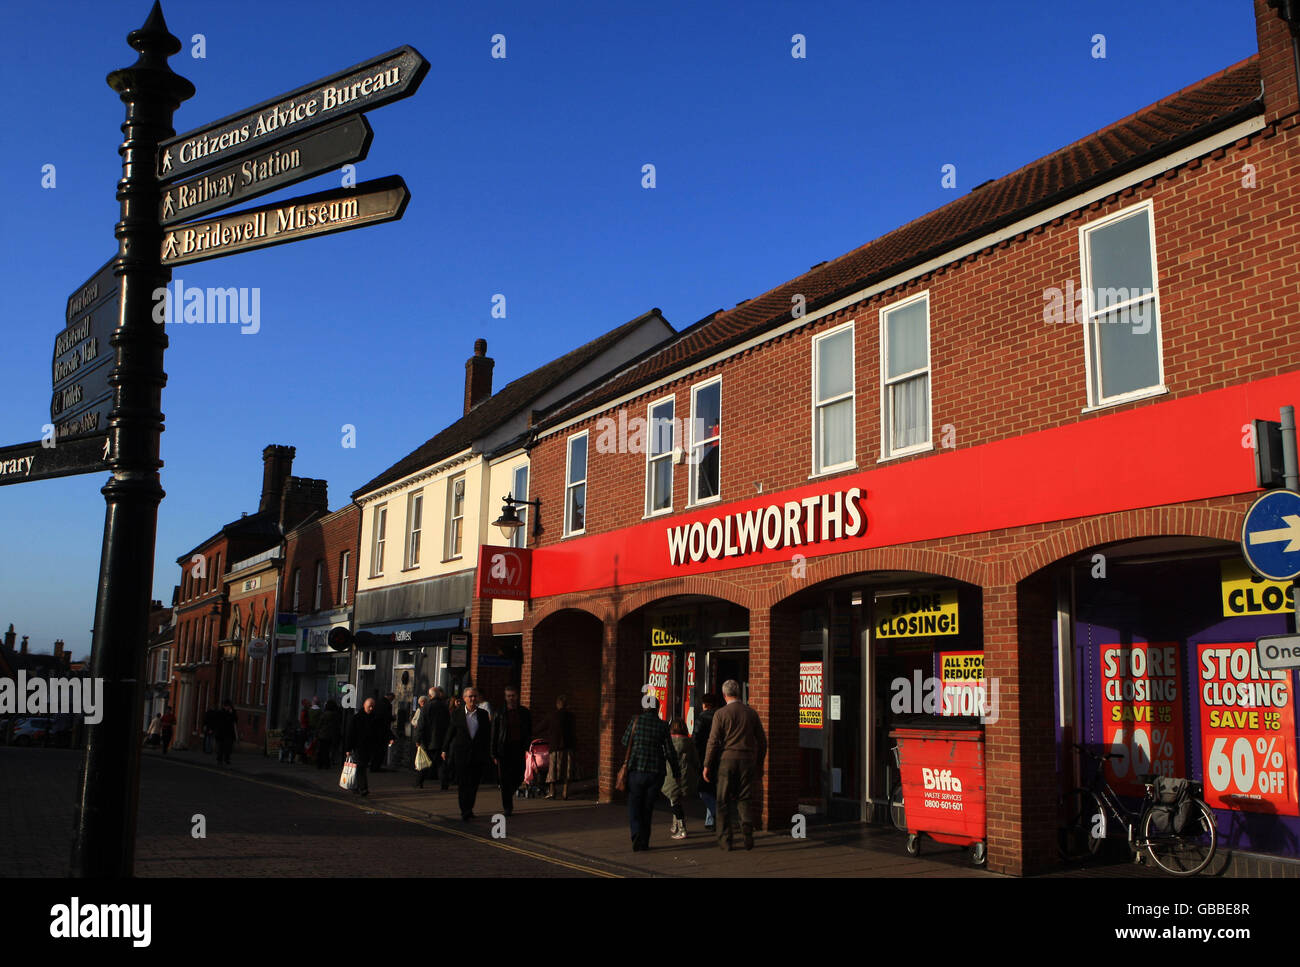 A Woolworths store in Wynondham, Norfolk which is soon to close down. 7 Market Place, Wynongham, Norfolk, NR18 0AG Stock Photo